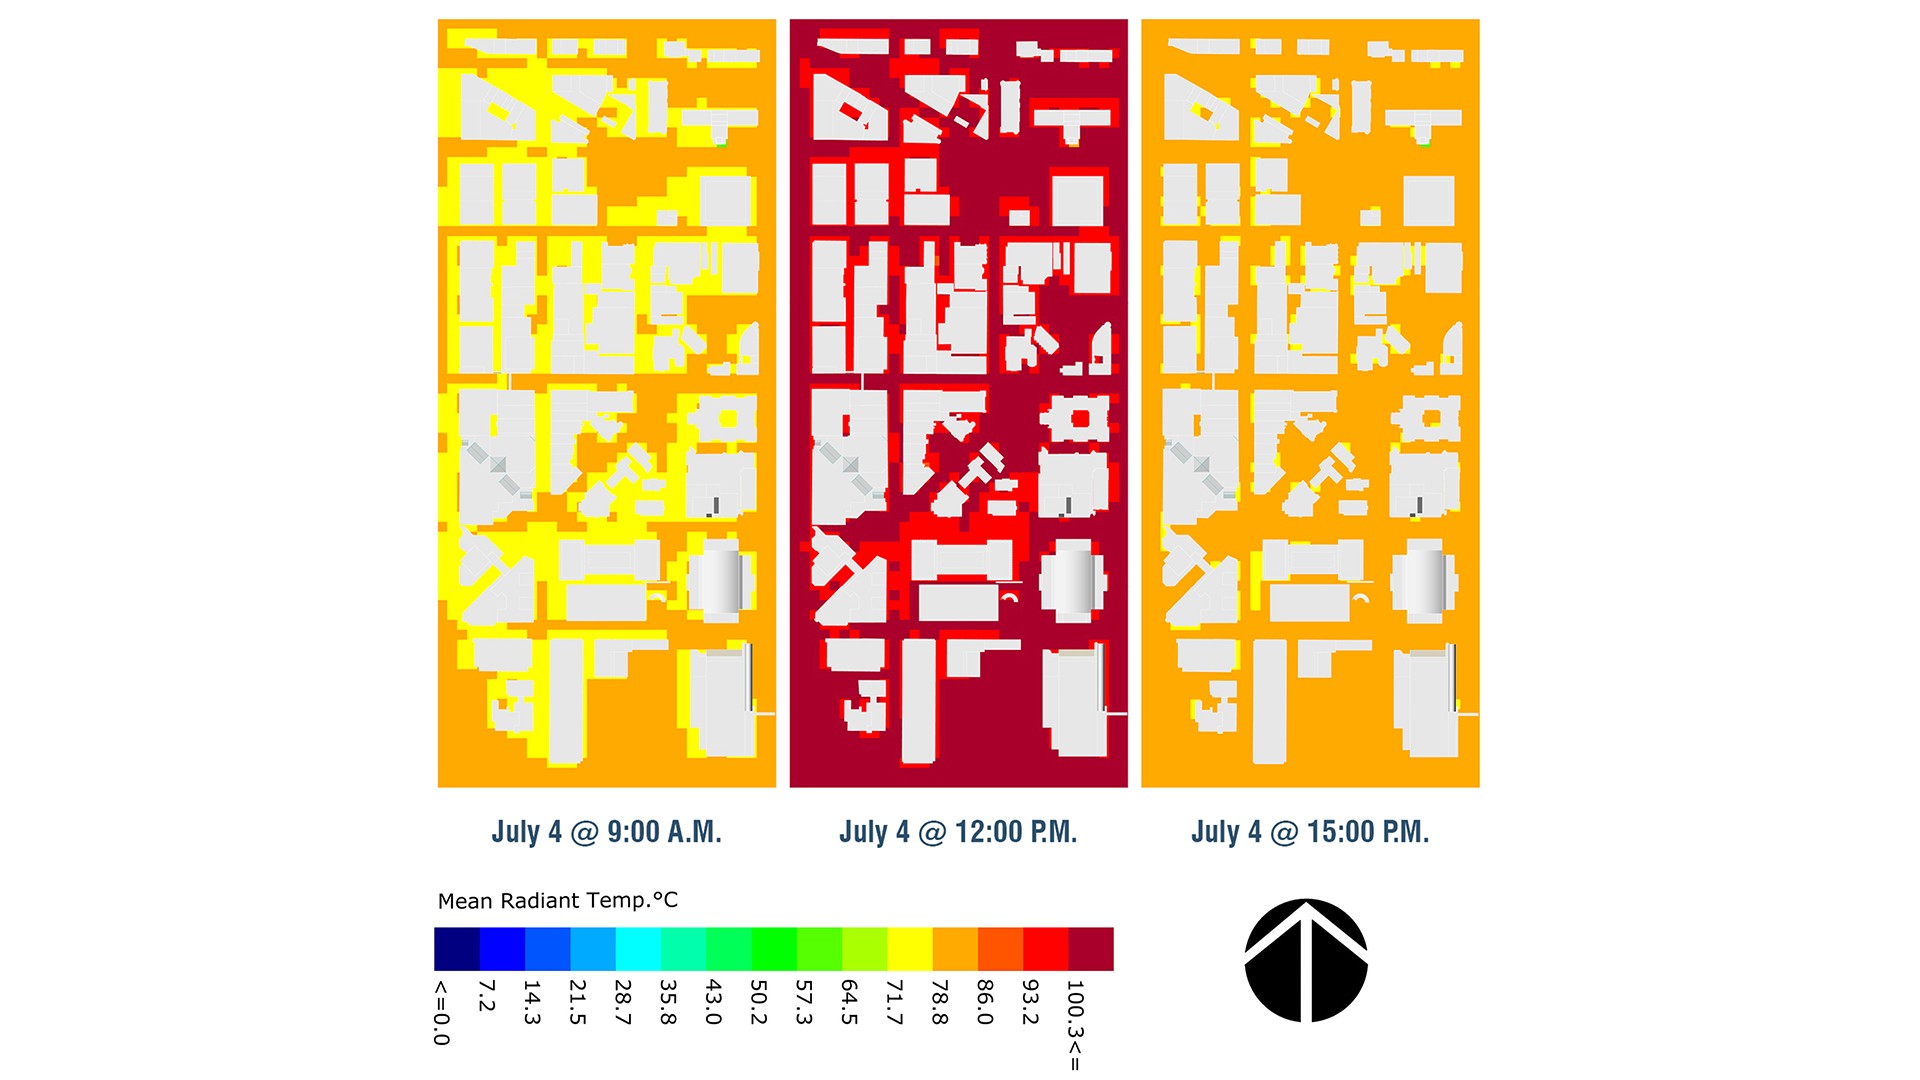 A map showing conditions of outdoor thermal comfort in a city across a day